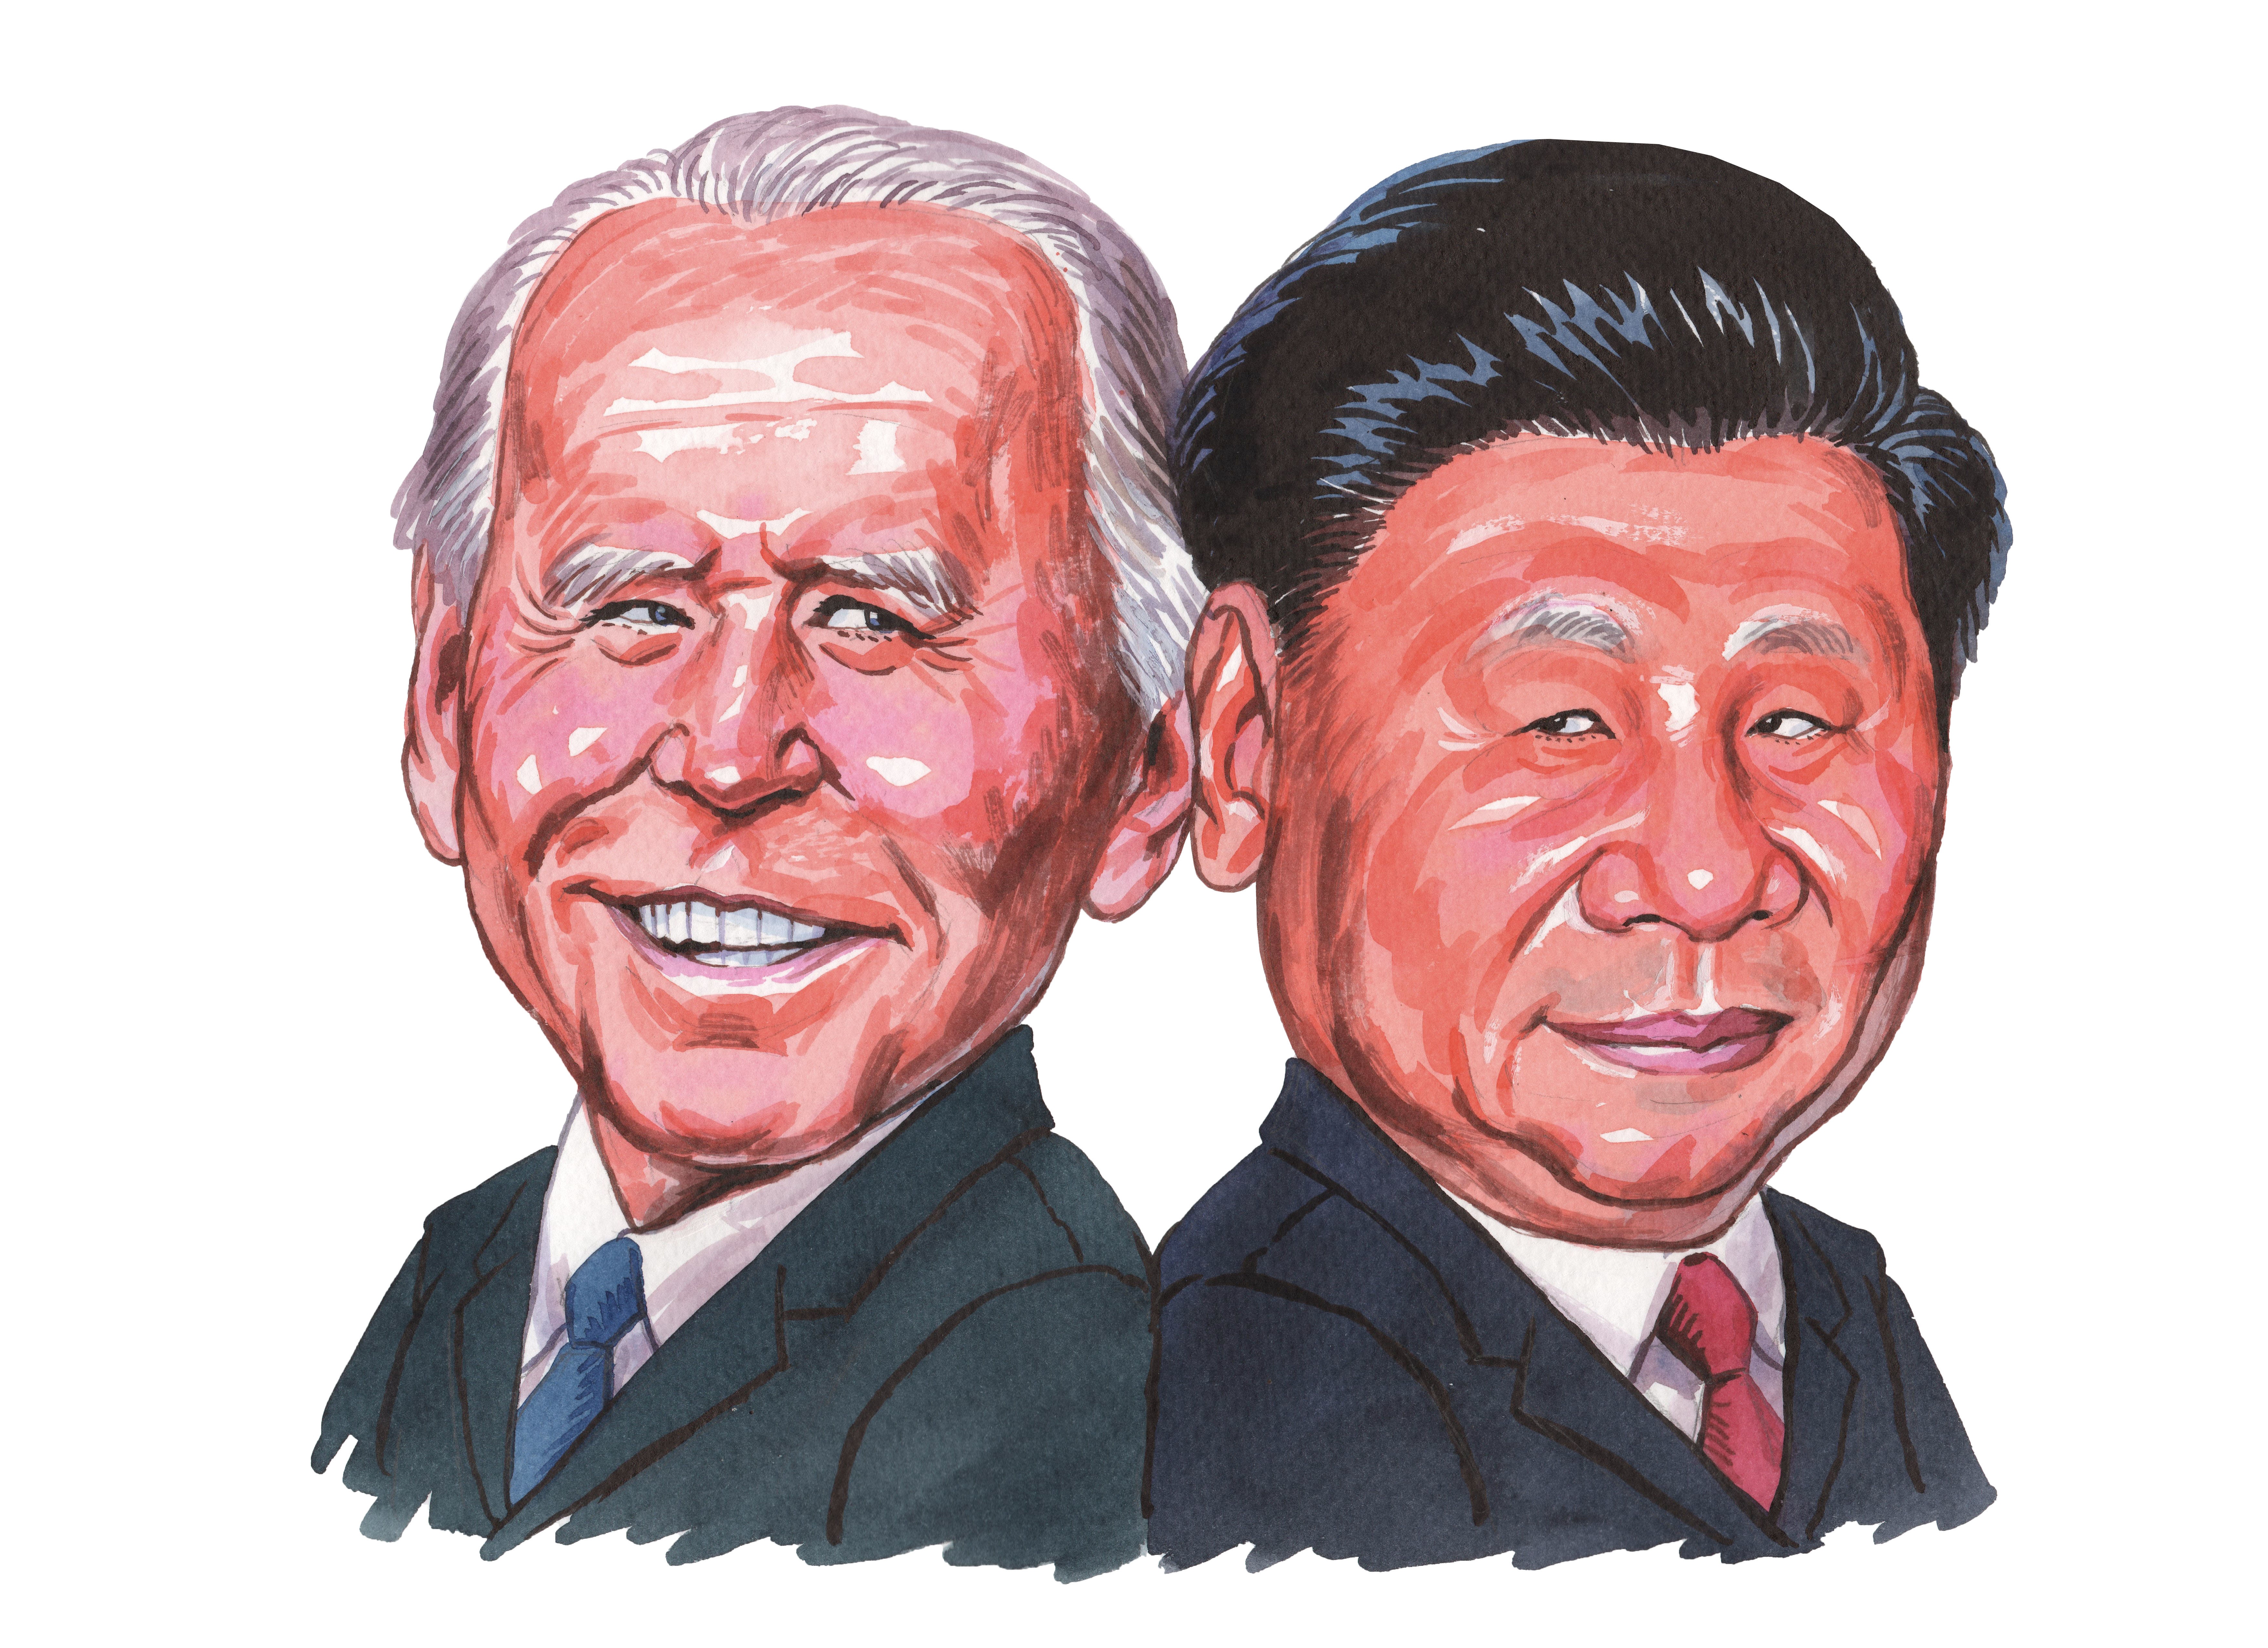 Xi Jinping Issues Stern Warning To Biden Over Pelosi Taiwan Visit: 'Those Who Play With Fire Will Perish By It'